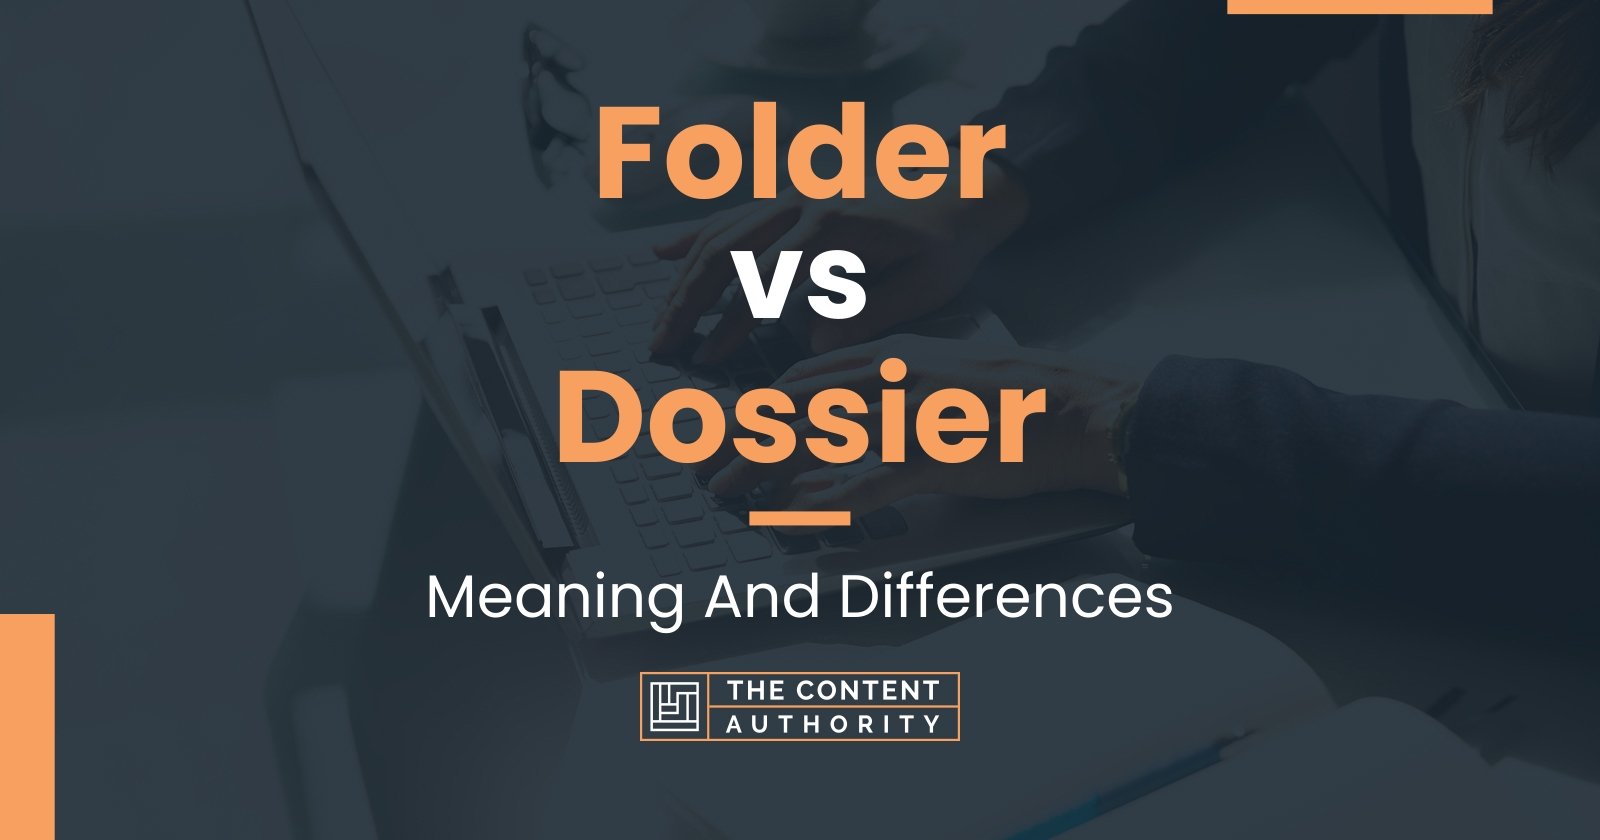 Folder vs Dossier: Meaning And Differences